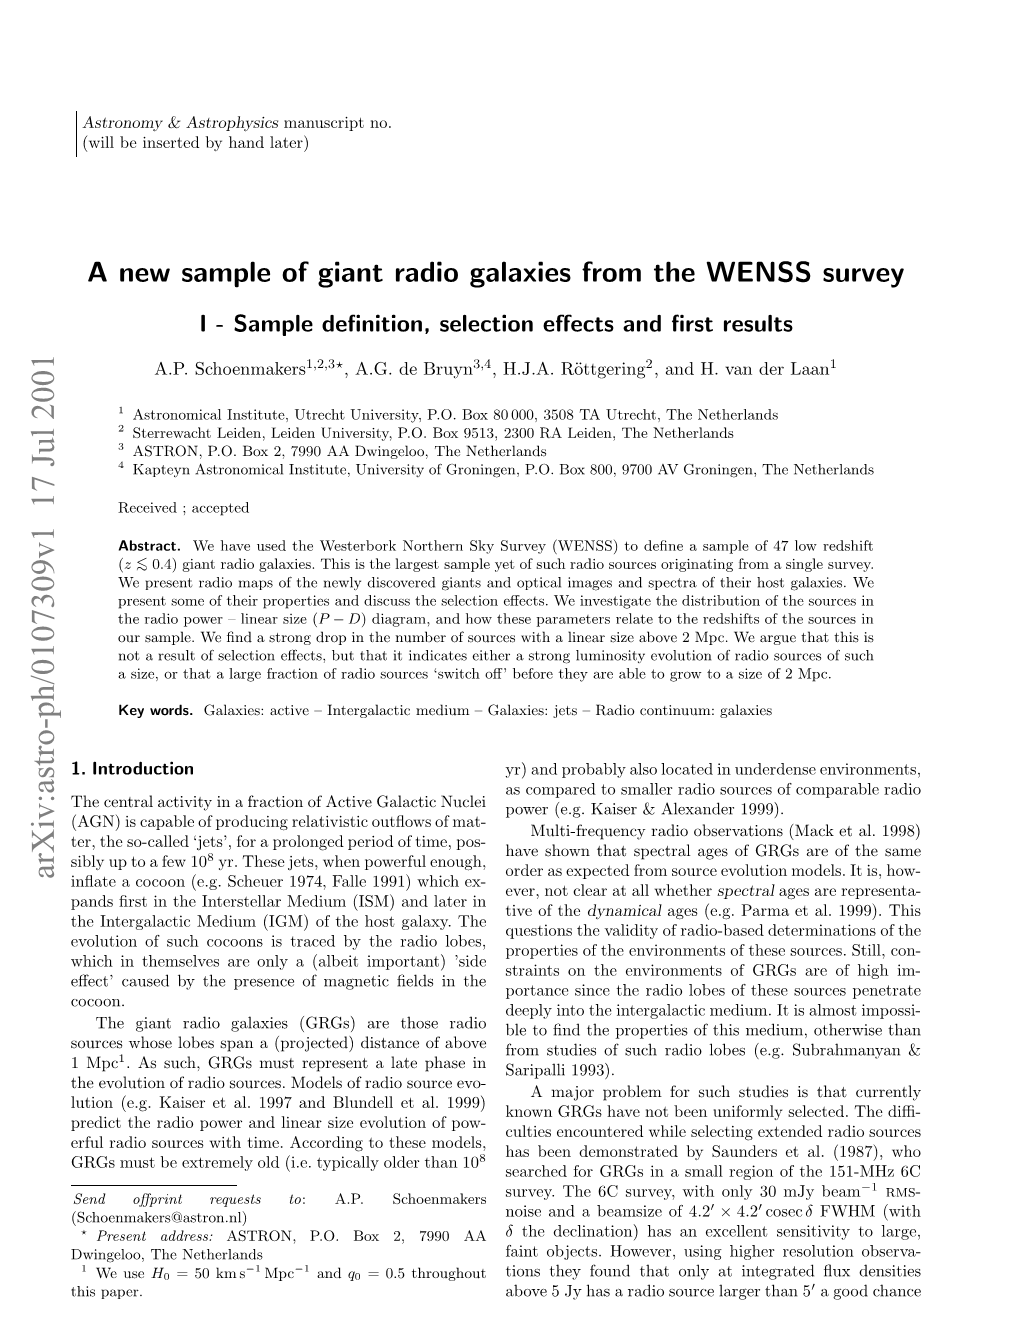 A New Sample of Giant Radio Galaxies from the WENSS Survey